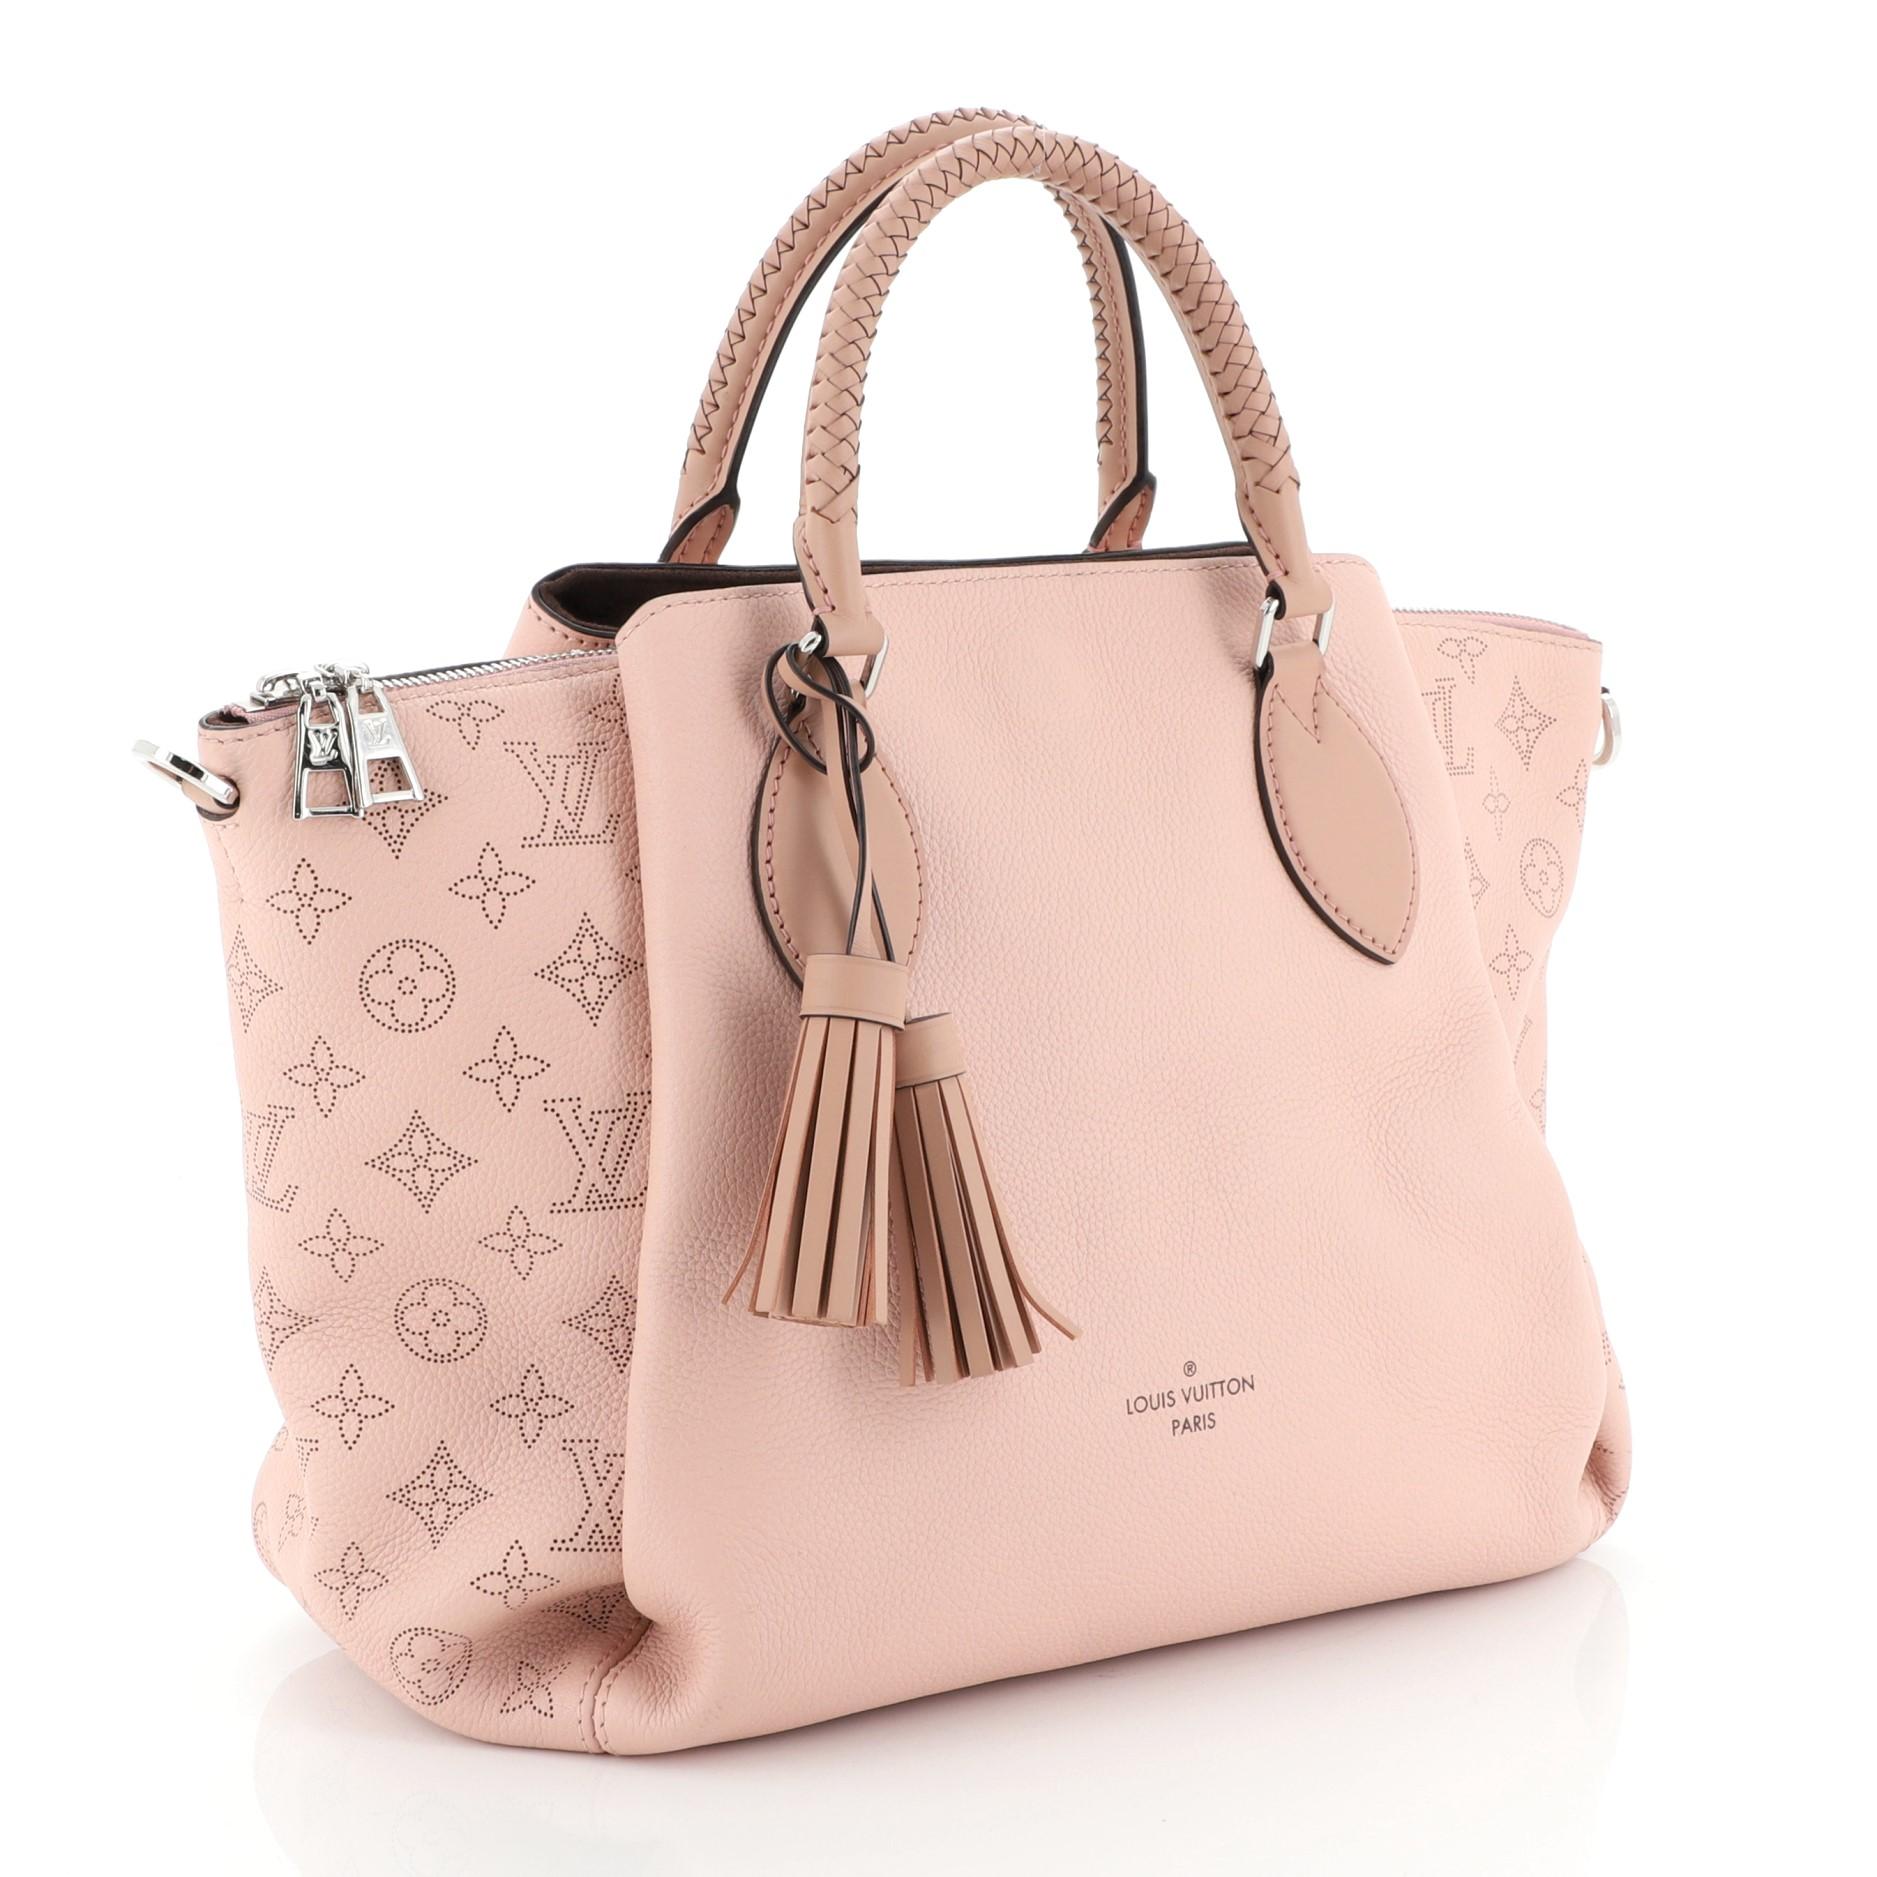 This Louis Vuitton Haumea Handbag Mahina Leather, crafted from pink mahina leather, features, dual braided handles and silver-tone hardware. Its zip closure opens to a brown microfiber interior with zip and slip pockets. Authenticity code reads: